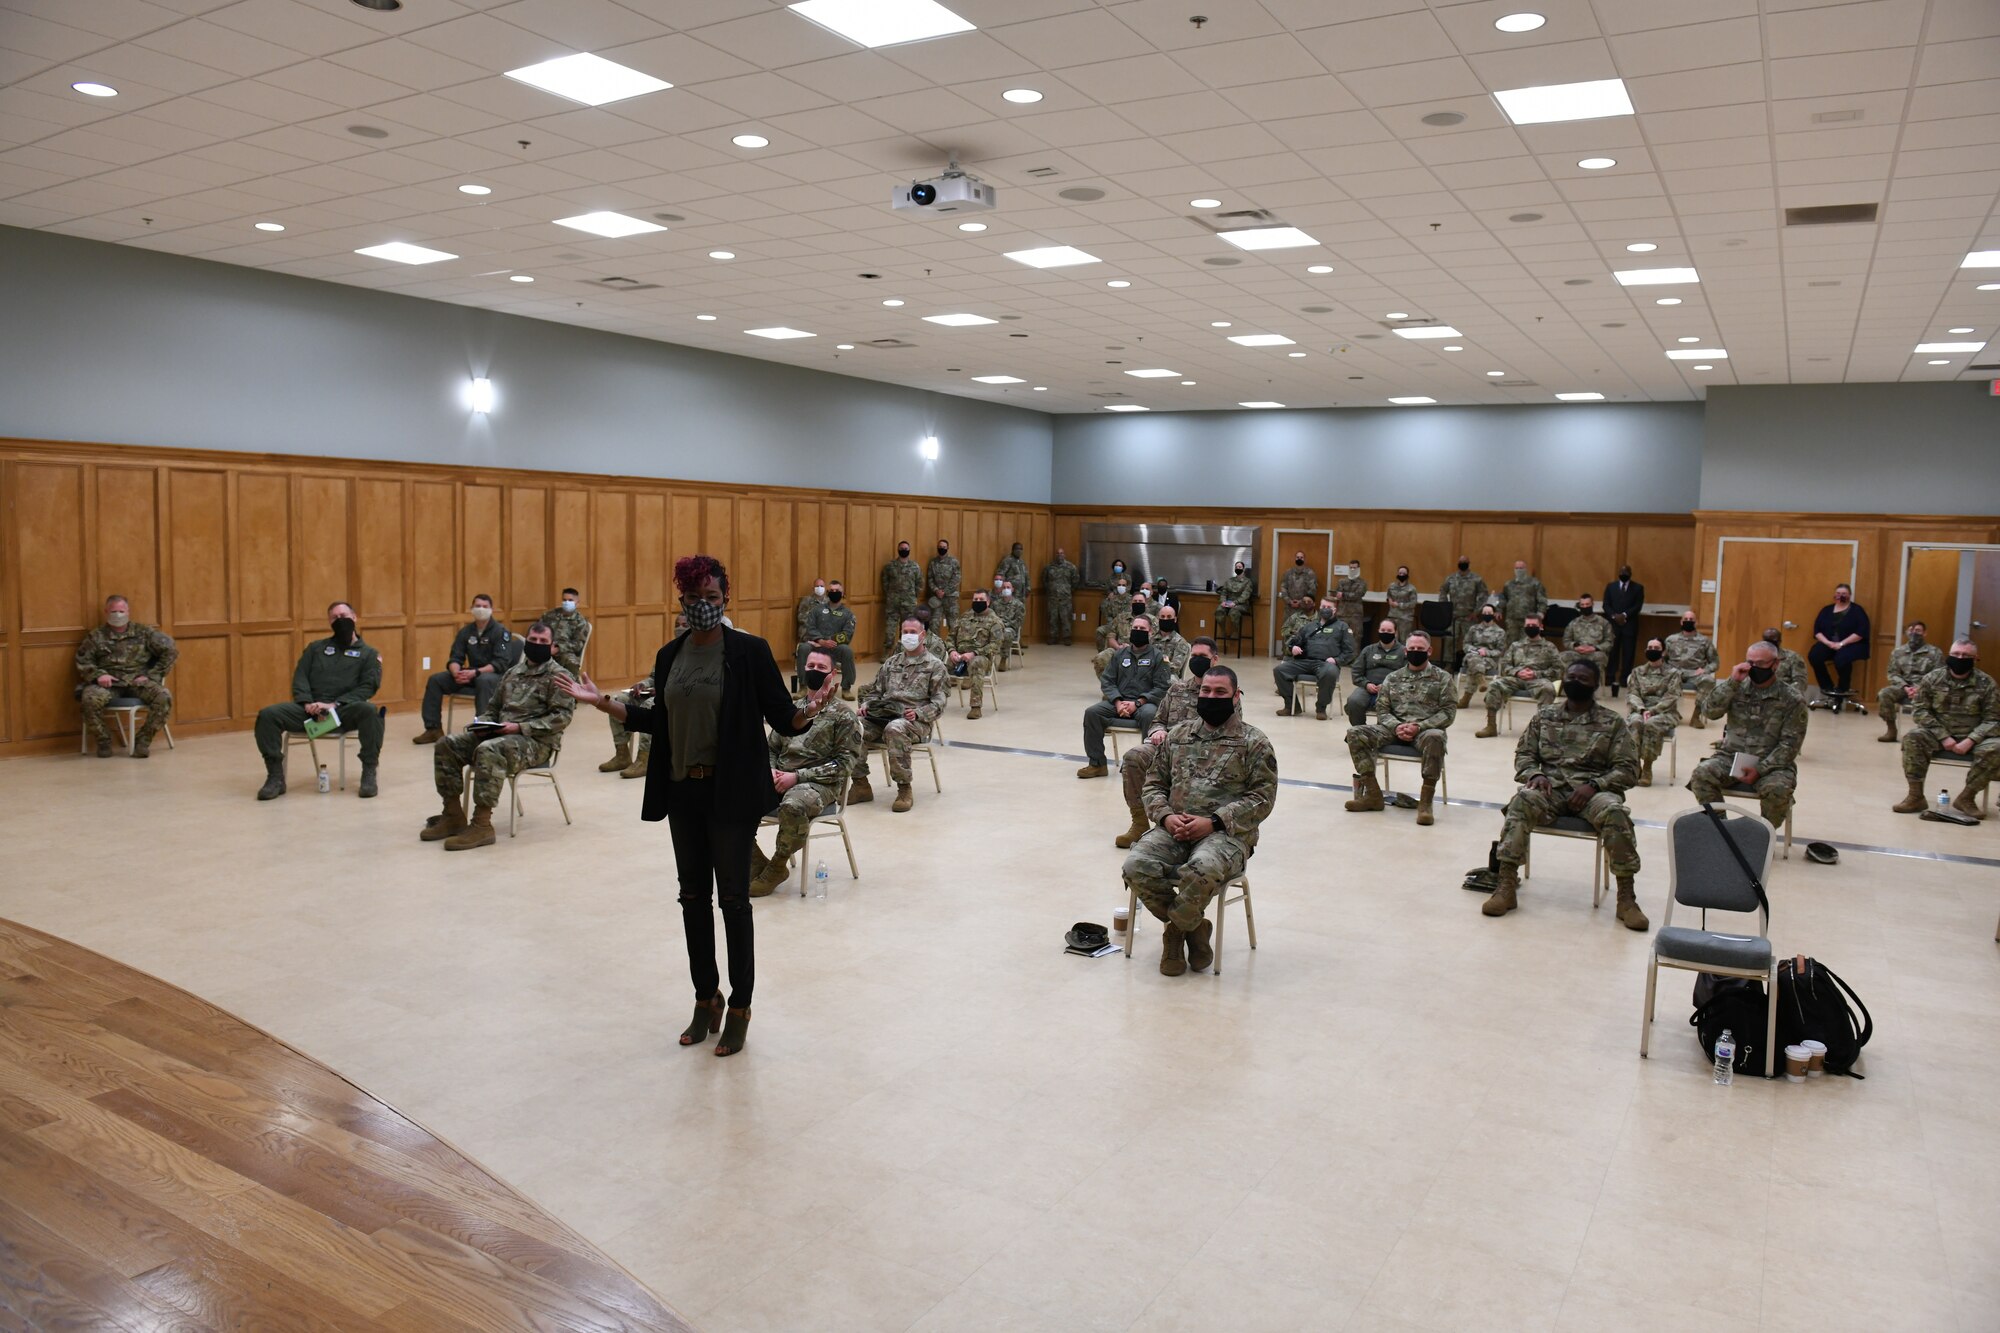 A woman stands in front of the room full of command teams